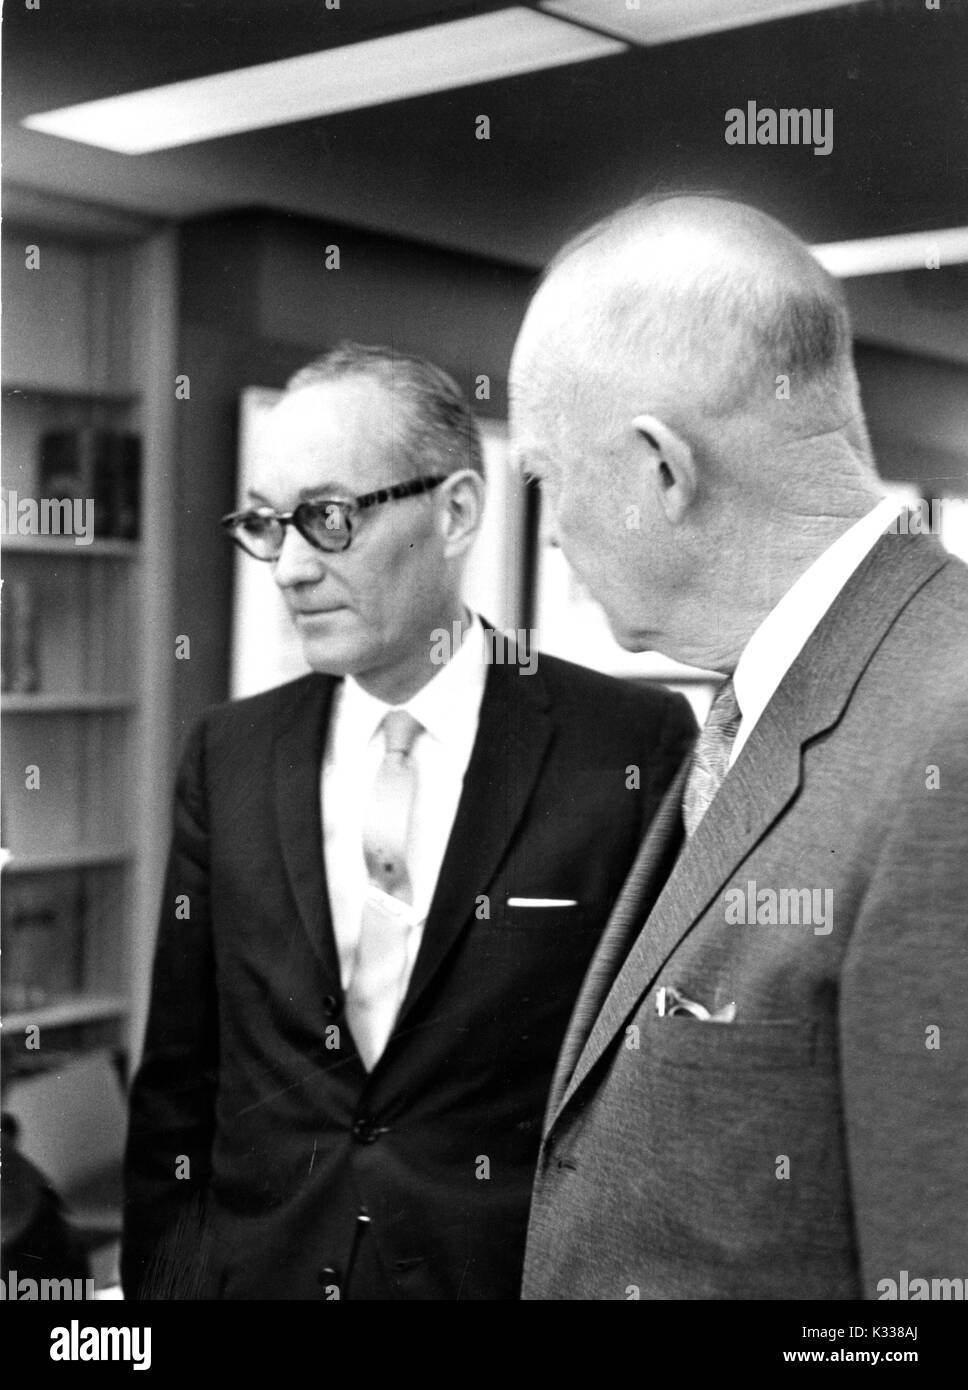 Candid portrait of 34th President of the United States Dwight D Eisenhower (right) speaking with State Department official Francis Orlando Wilcox (center) in the Milton S. Eisenhower Library on the Homewood campus of Johns Hopkins University in Baltimore, Maryland, 1965. Stock Photo